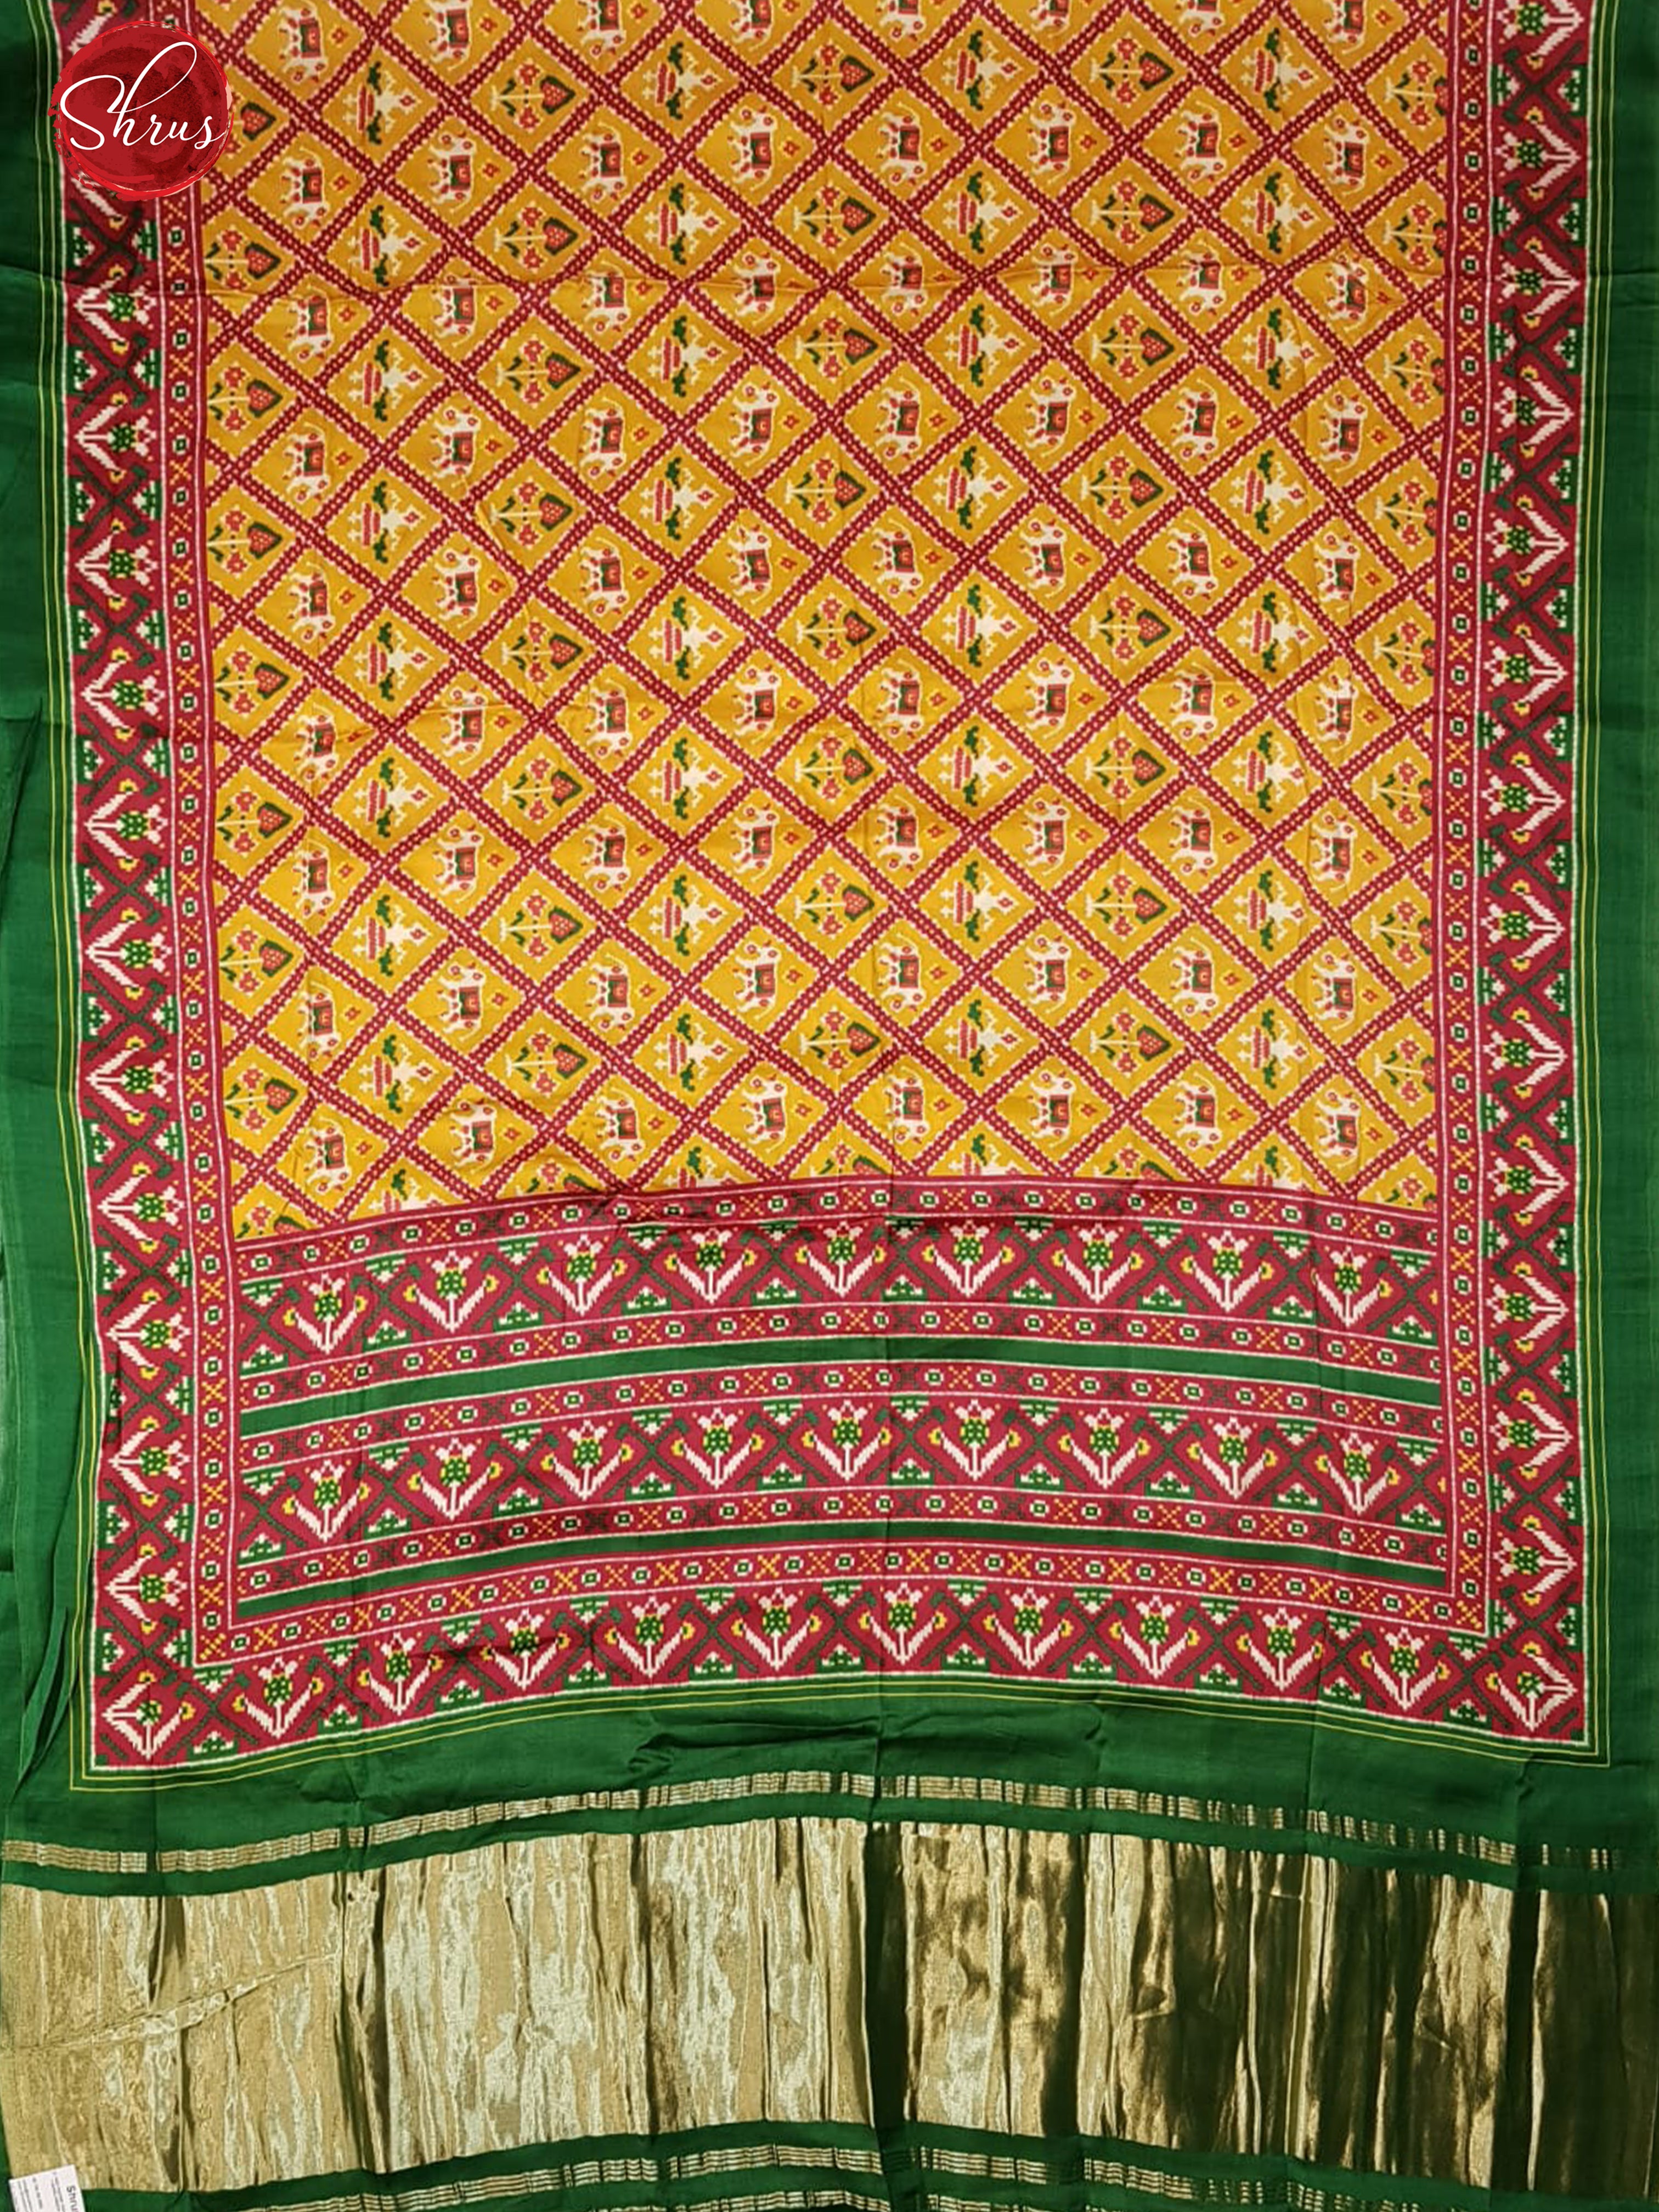 Mustardy Yellow & Green - Modal Silk with patola printed body & Contrast printed Border - Shop on ShrusEternity.com